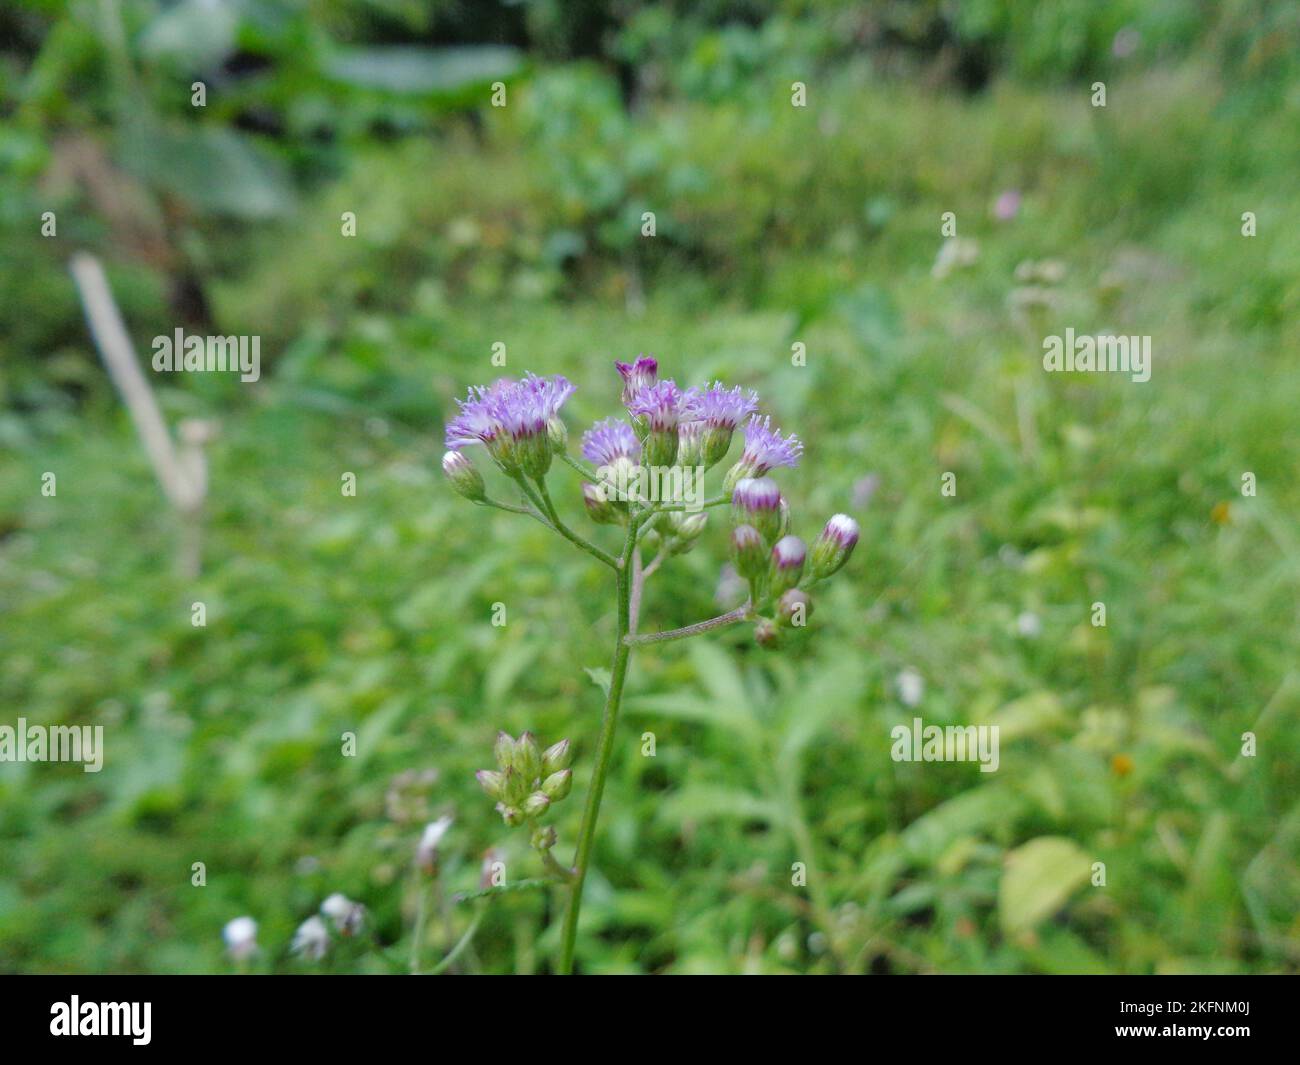 A close-up shot of a meadow flower Stock Photo